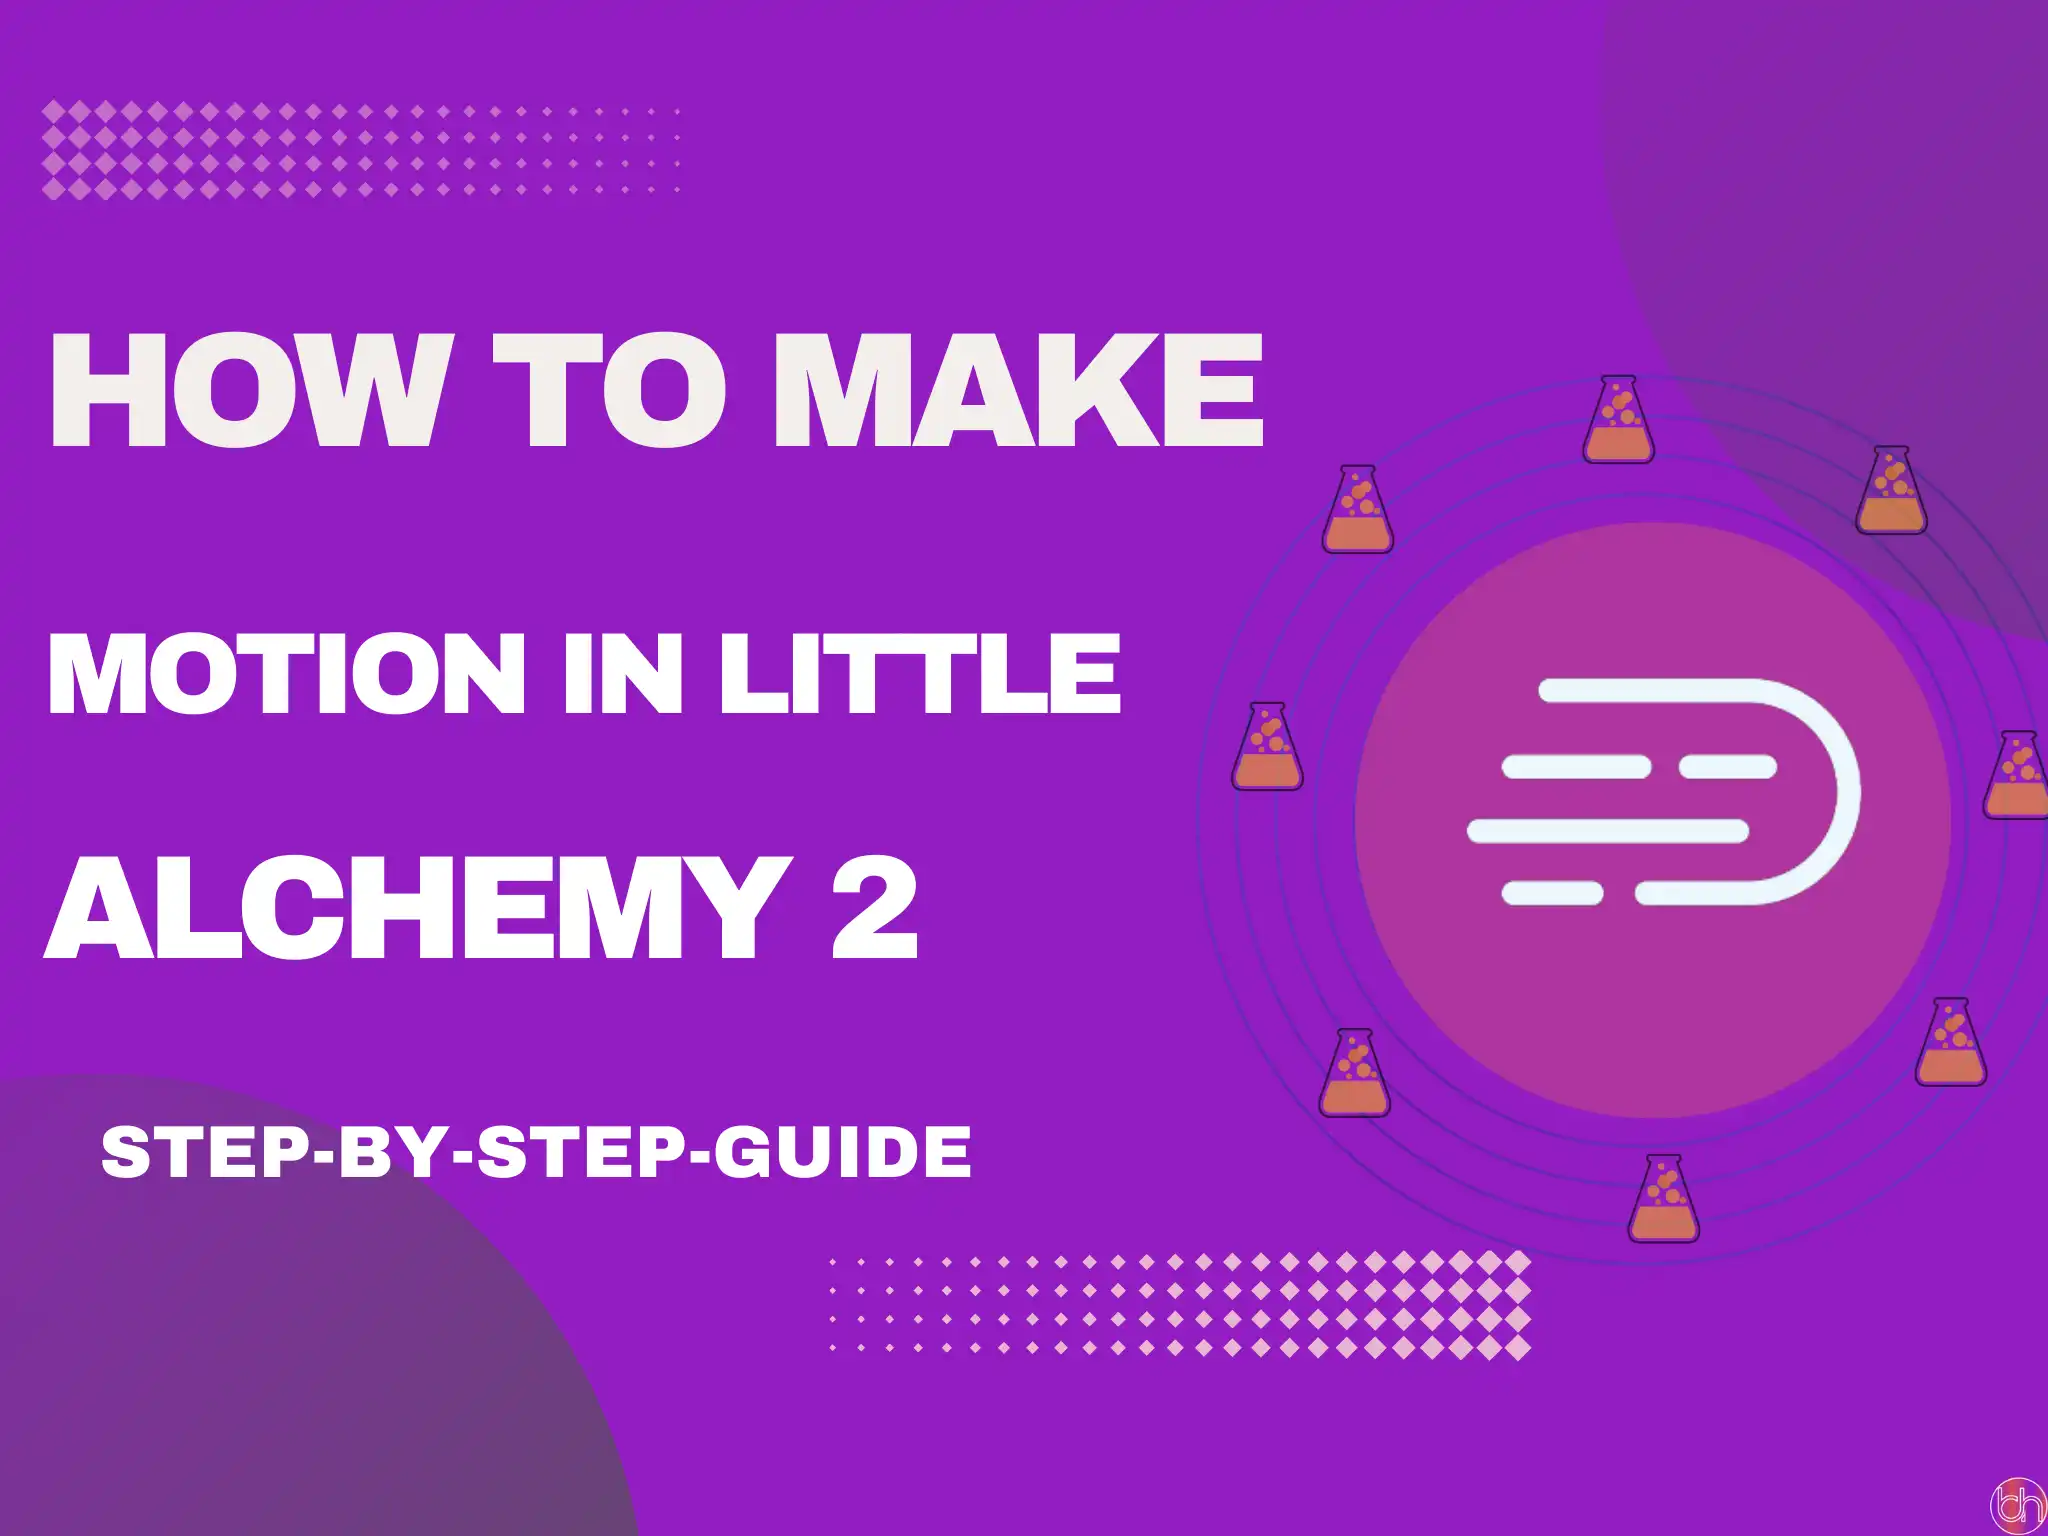 How to make Motion in Little Alchemy 2